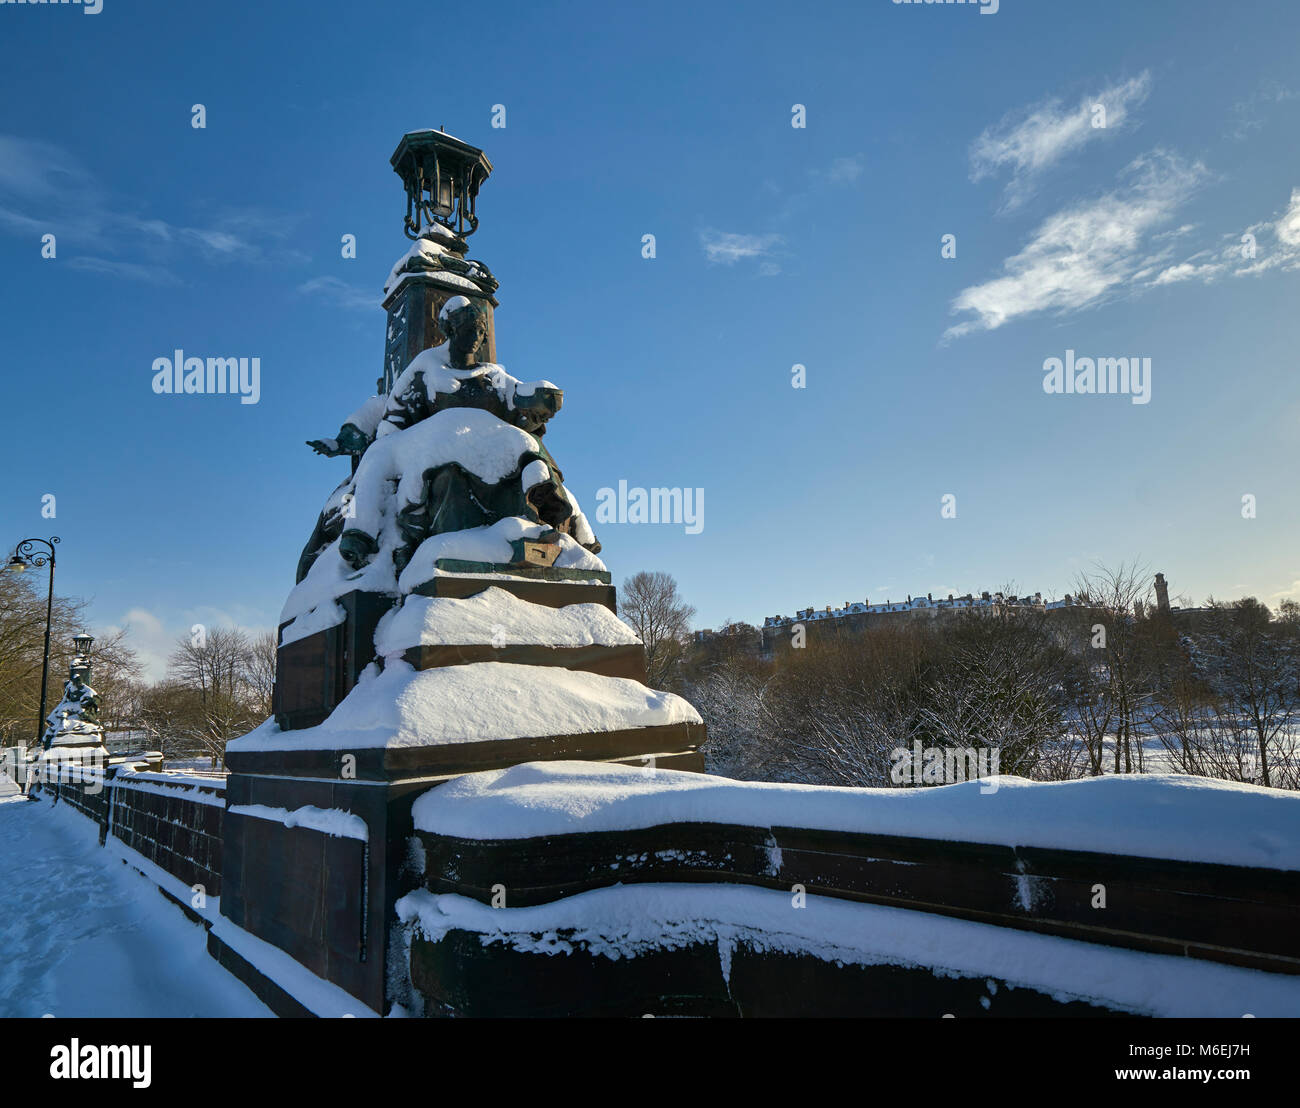 Snow covered statues on Kelvin Way Bridge on a sunny day after heavy snow Stock Photo